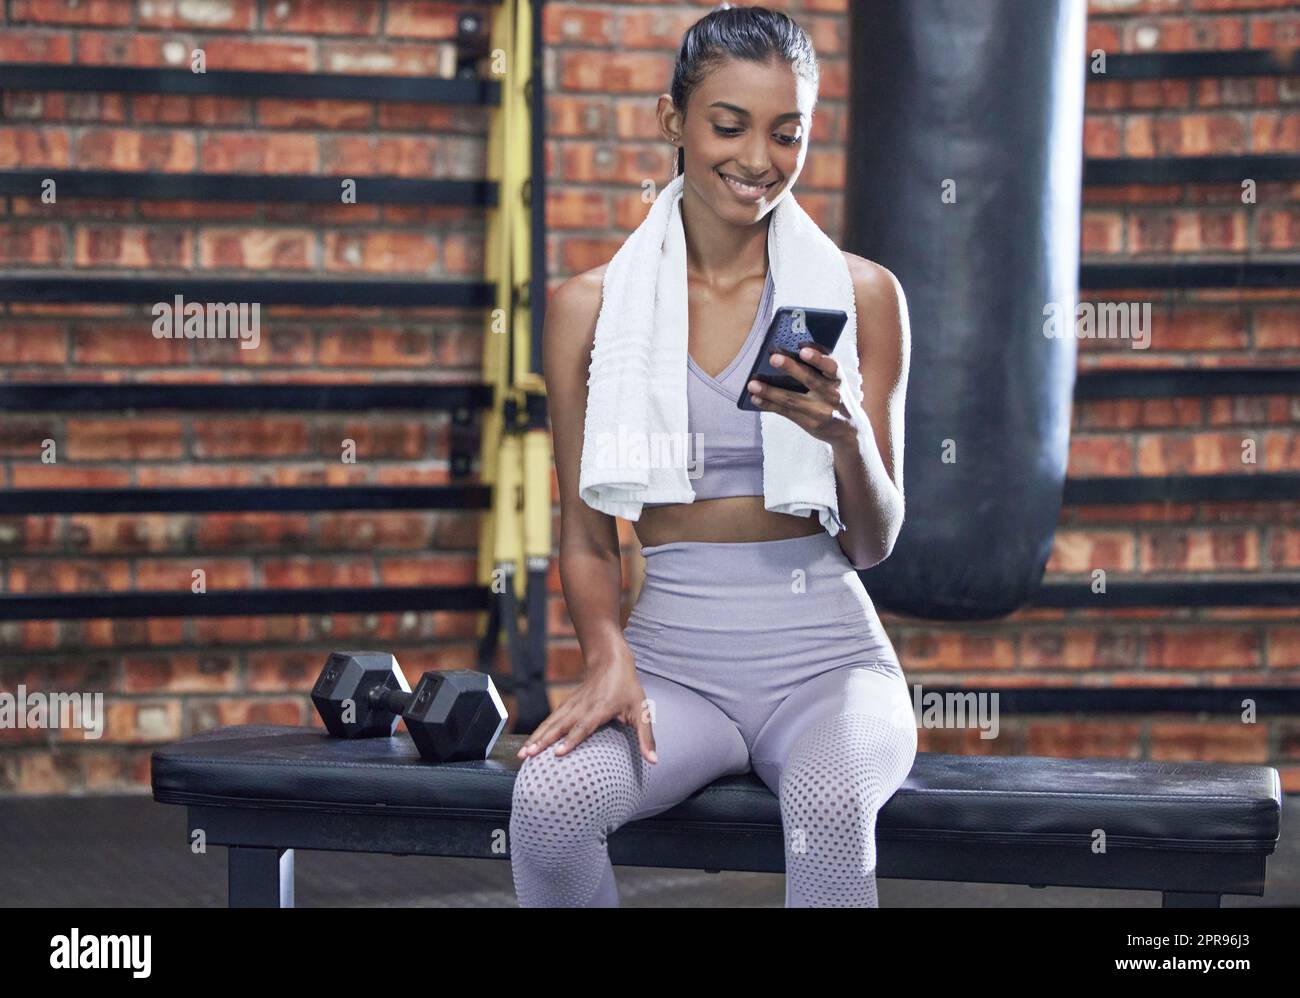 Lets see on my fitness app if I reached my goals. a sporty young woman using a cellphone while taking a break in a gym. Stock Photo